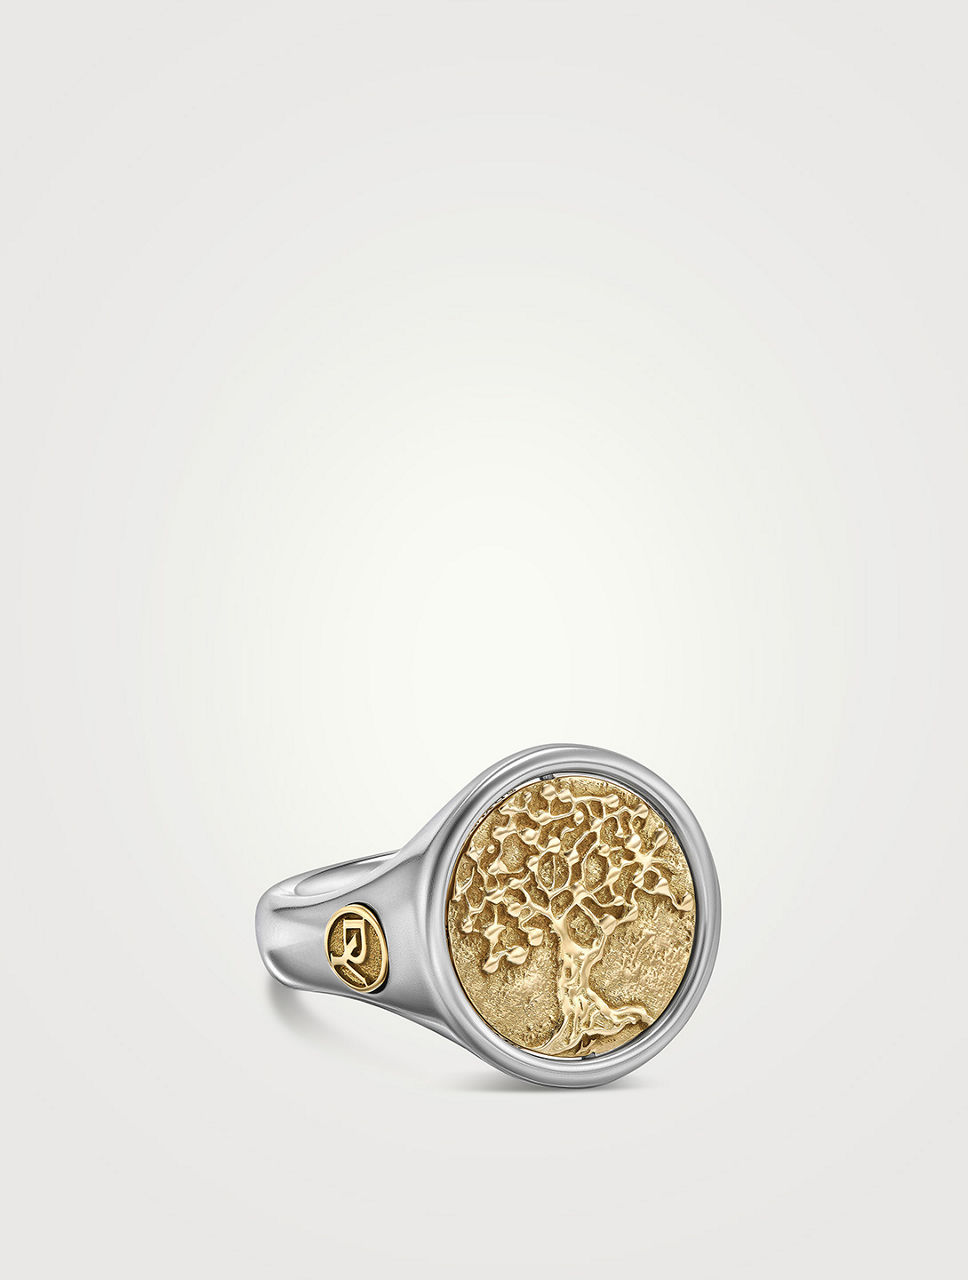 Life And Death Duality Signet Ring Sterling Silver With 18k Yellow Gold